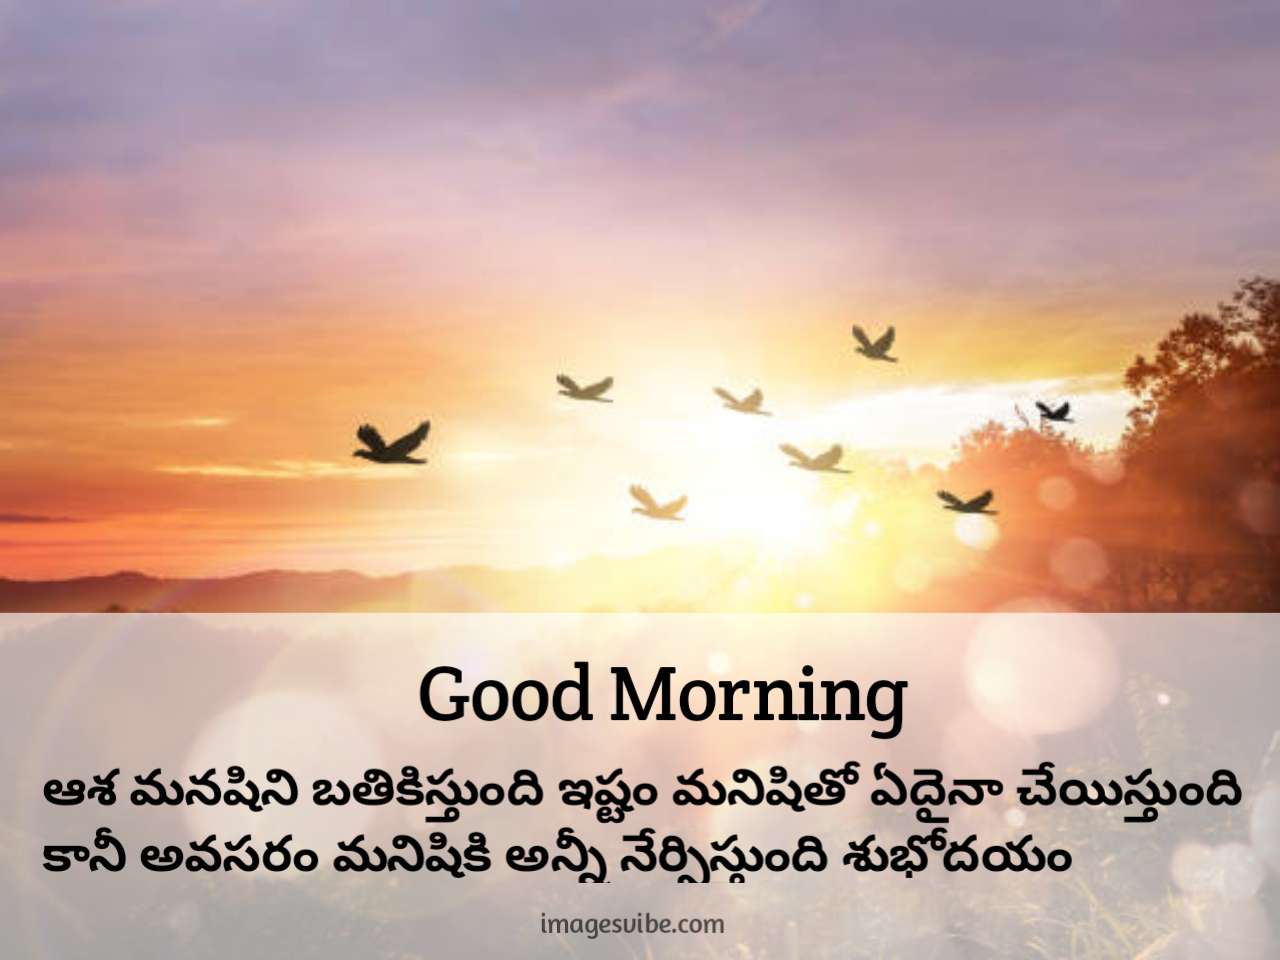 An Incredible Compilation of over 999 Beautiful Good Morning Images in Telugu – Full 4K Resolution